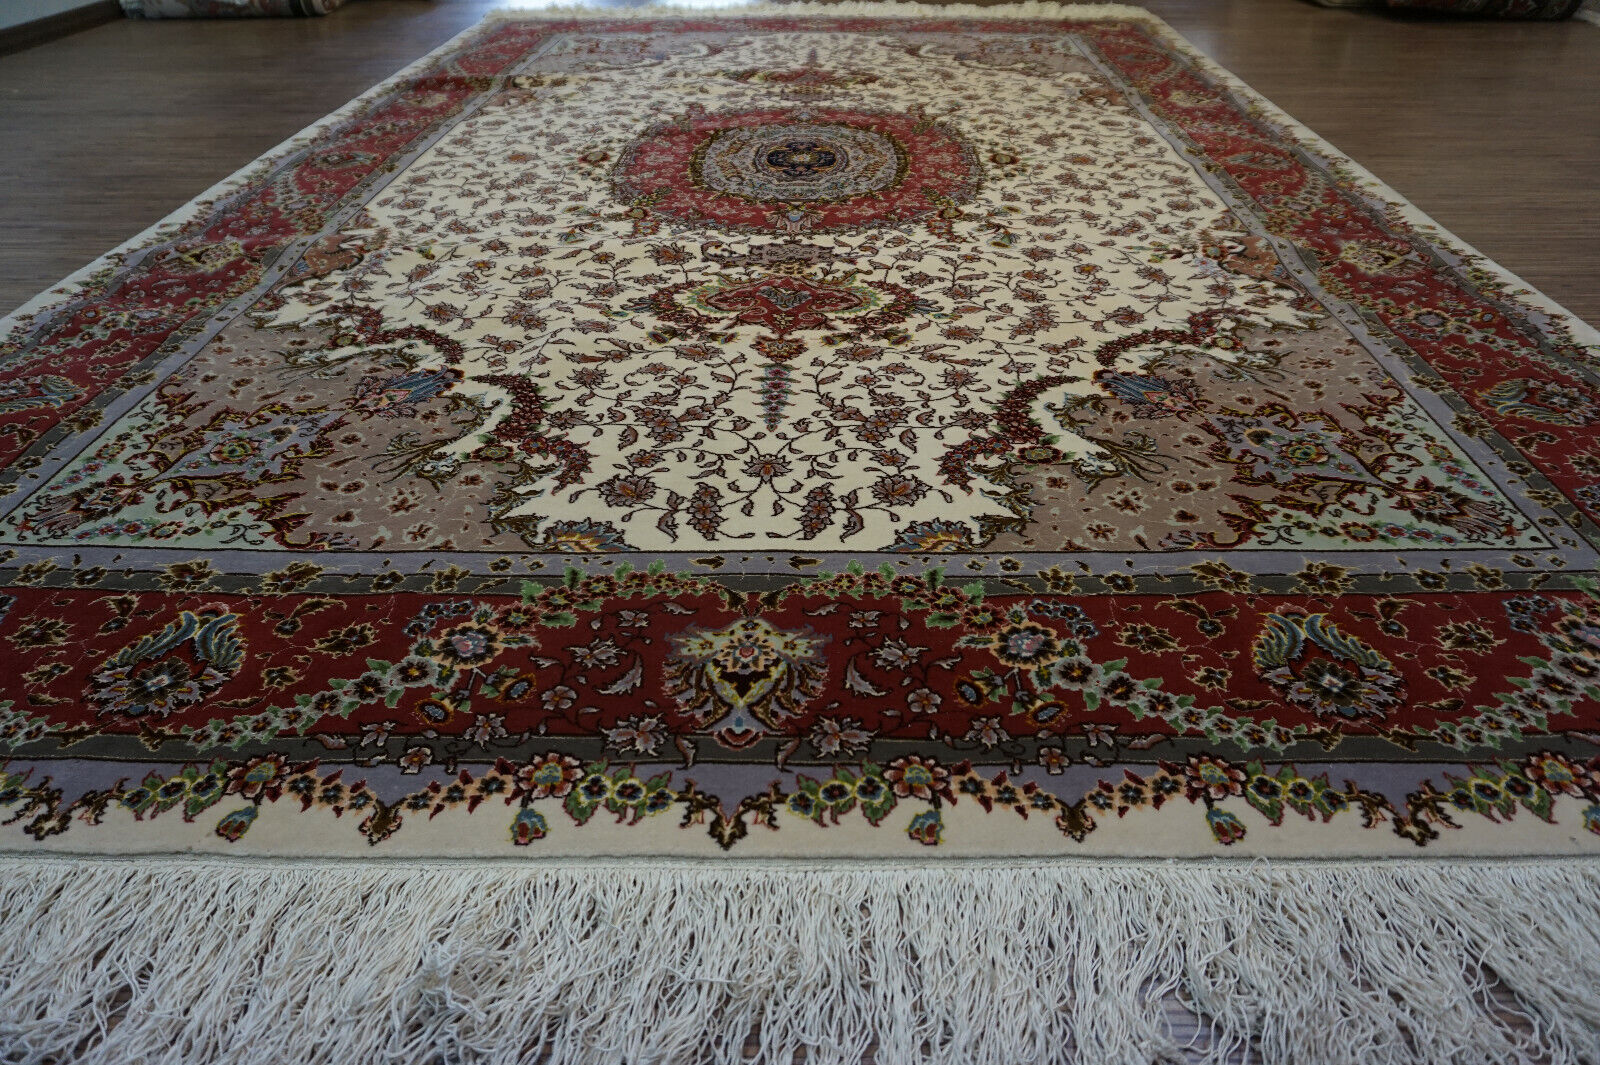  Close-up of the rich colors and fine detailing on the Persian Tabriz rug